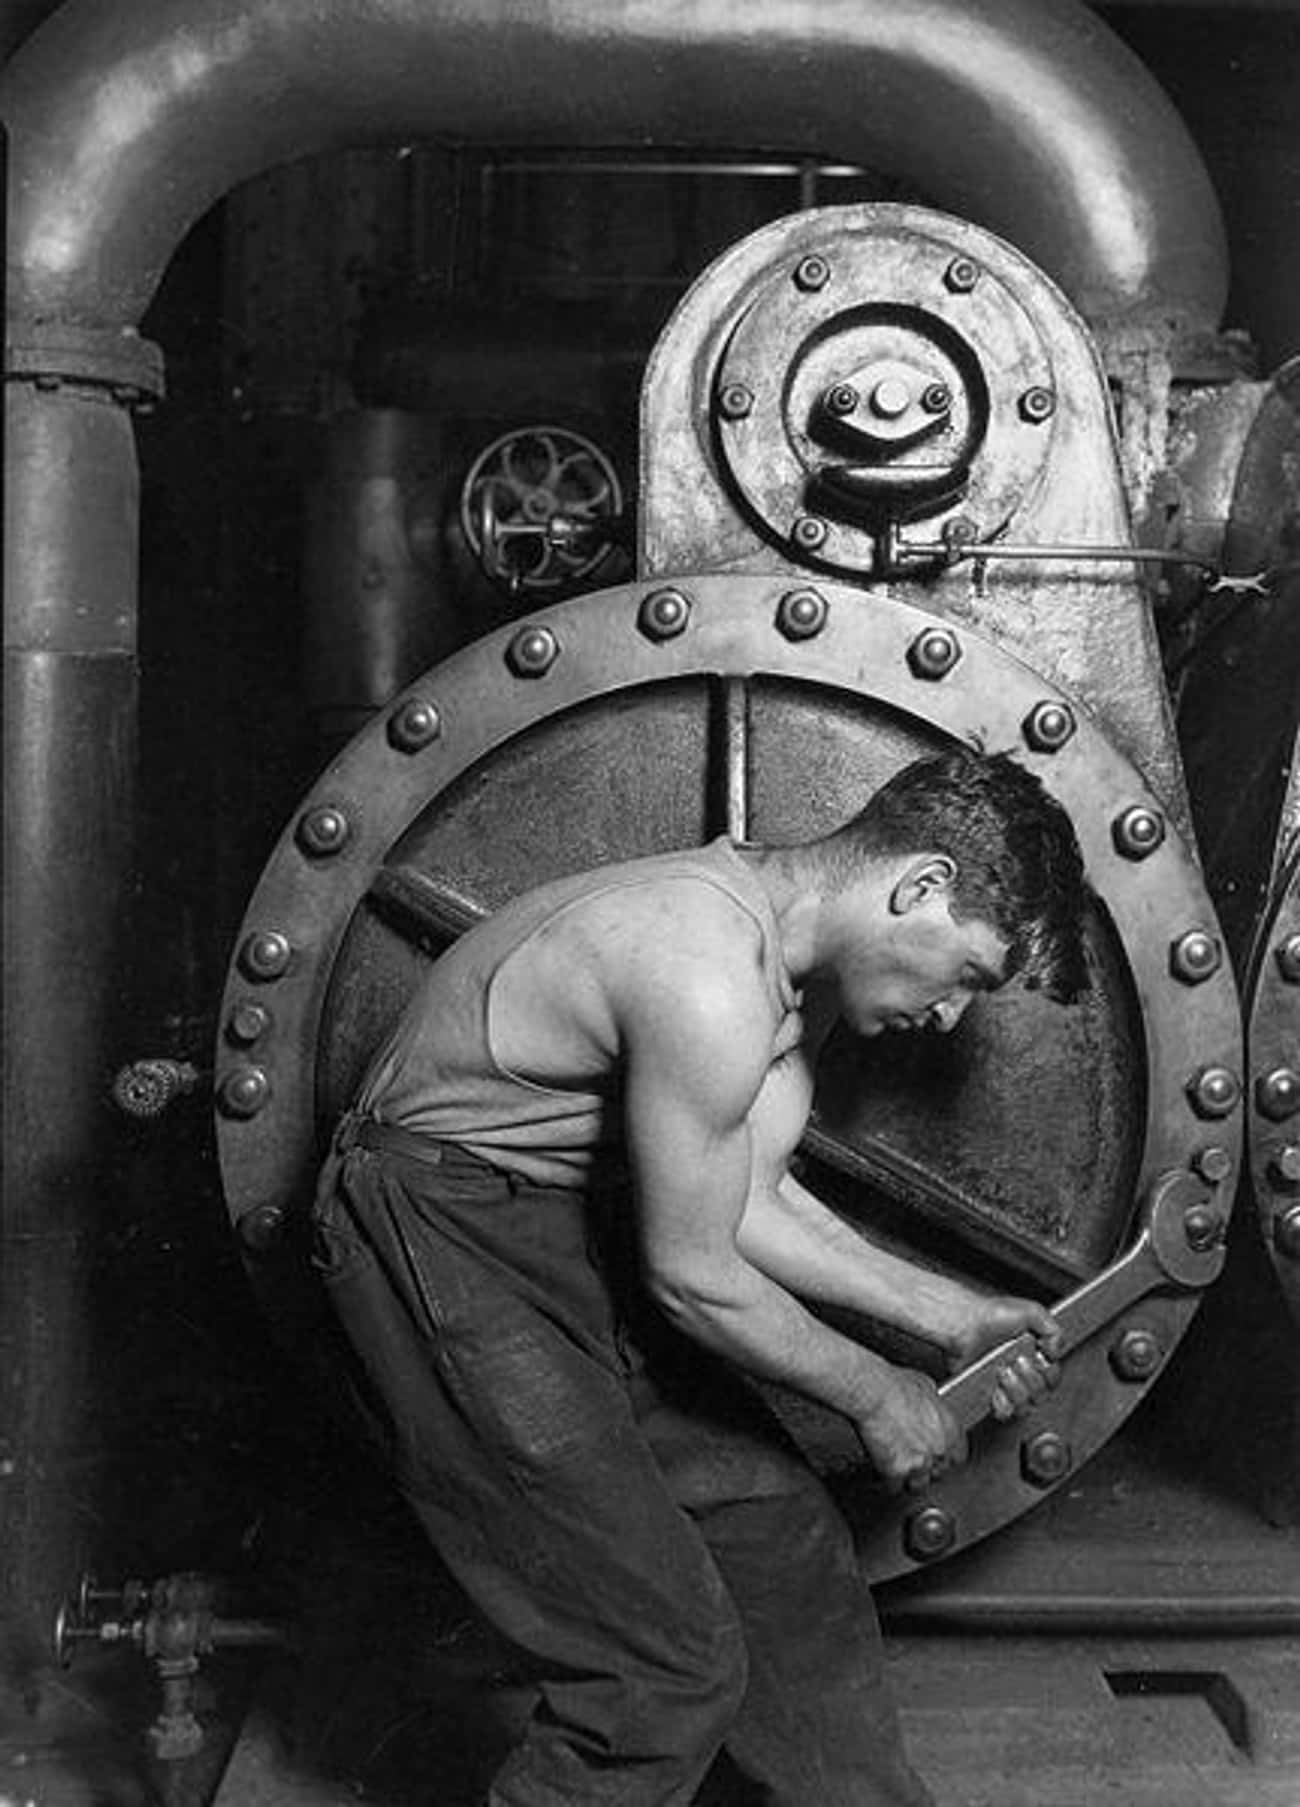 1920: 'Power House Mechanic Working on Steam Pump' By Lewis W. Hine